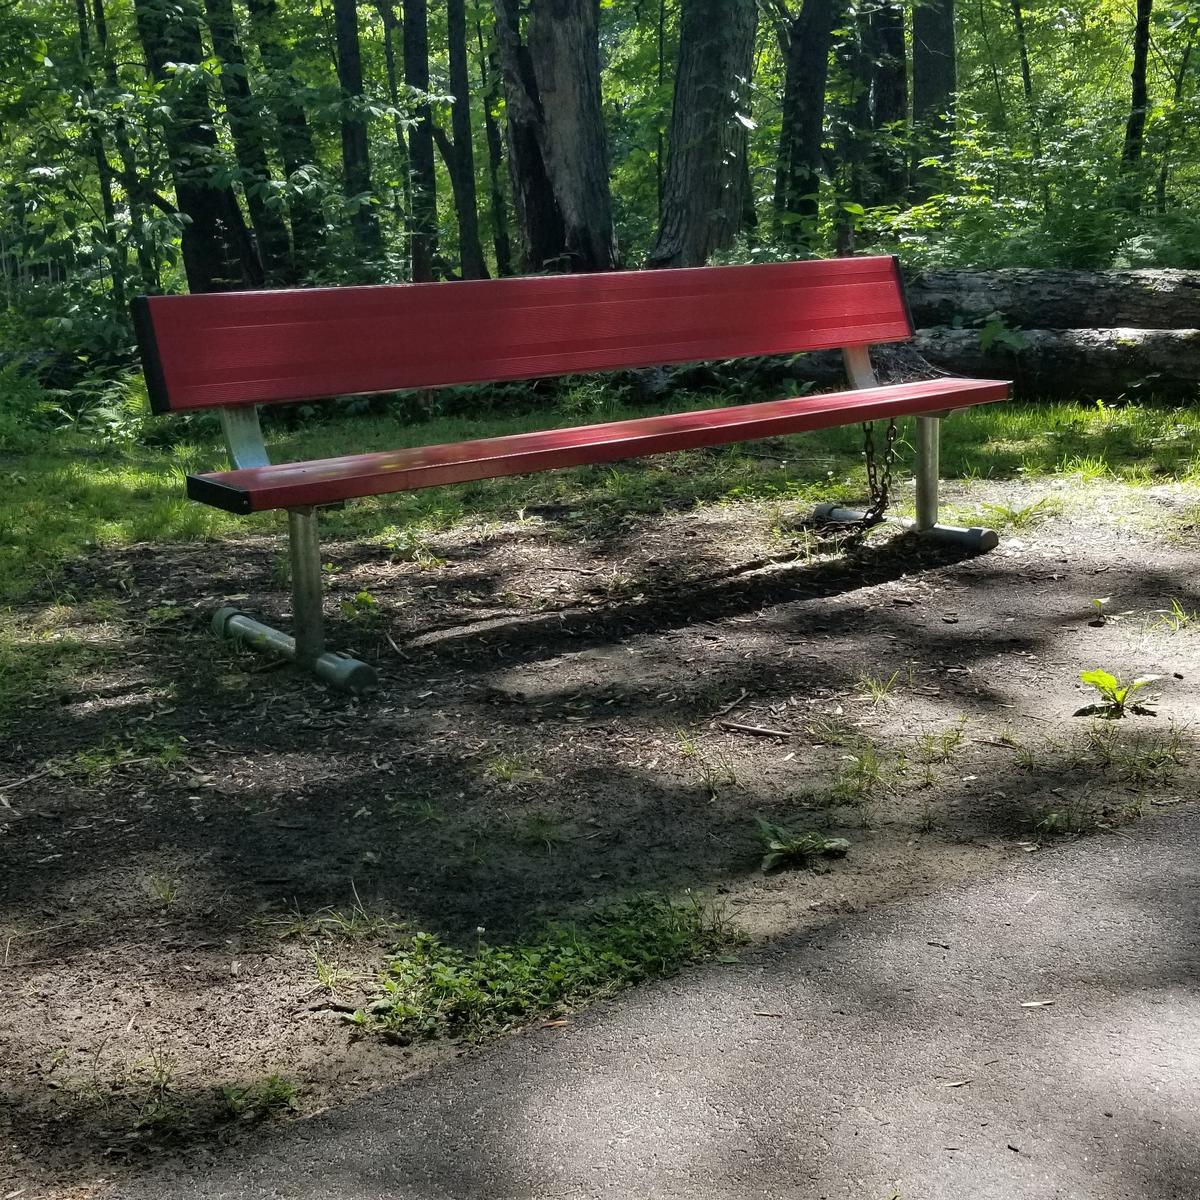 A resting bench along the trail.